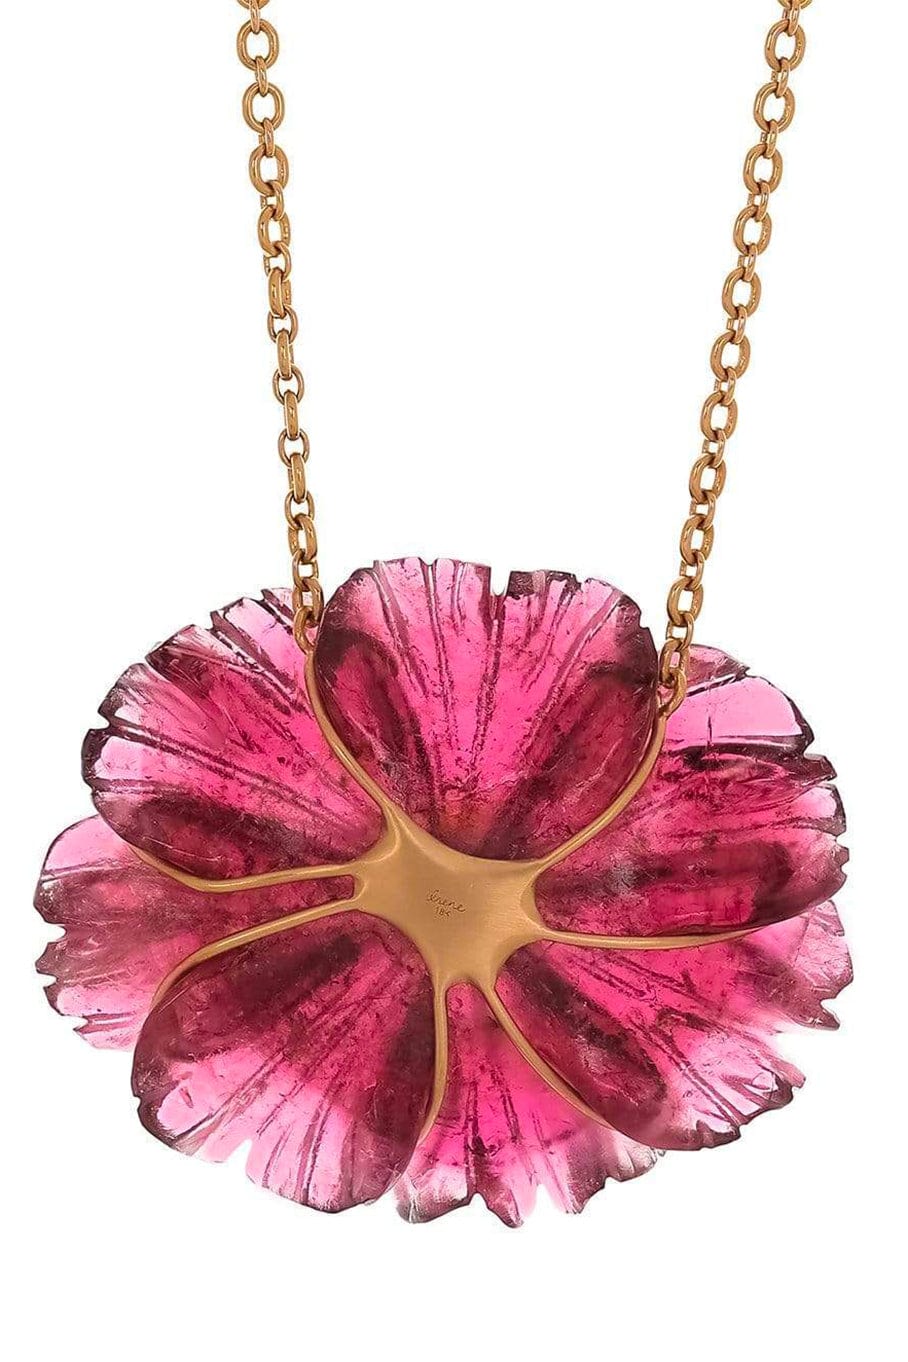 IRENE NEUWIRTH JEWELRY-Carved Pink Tourmaline Tropical Flower Necklace-ROSE GOLD